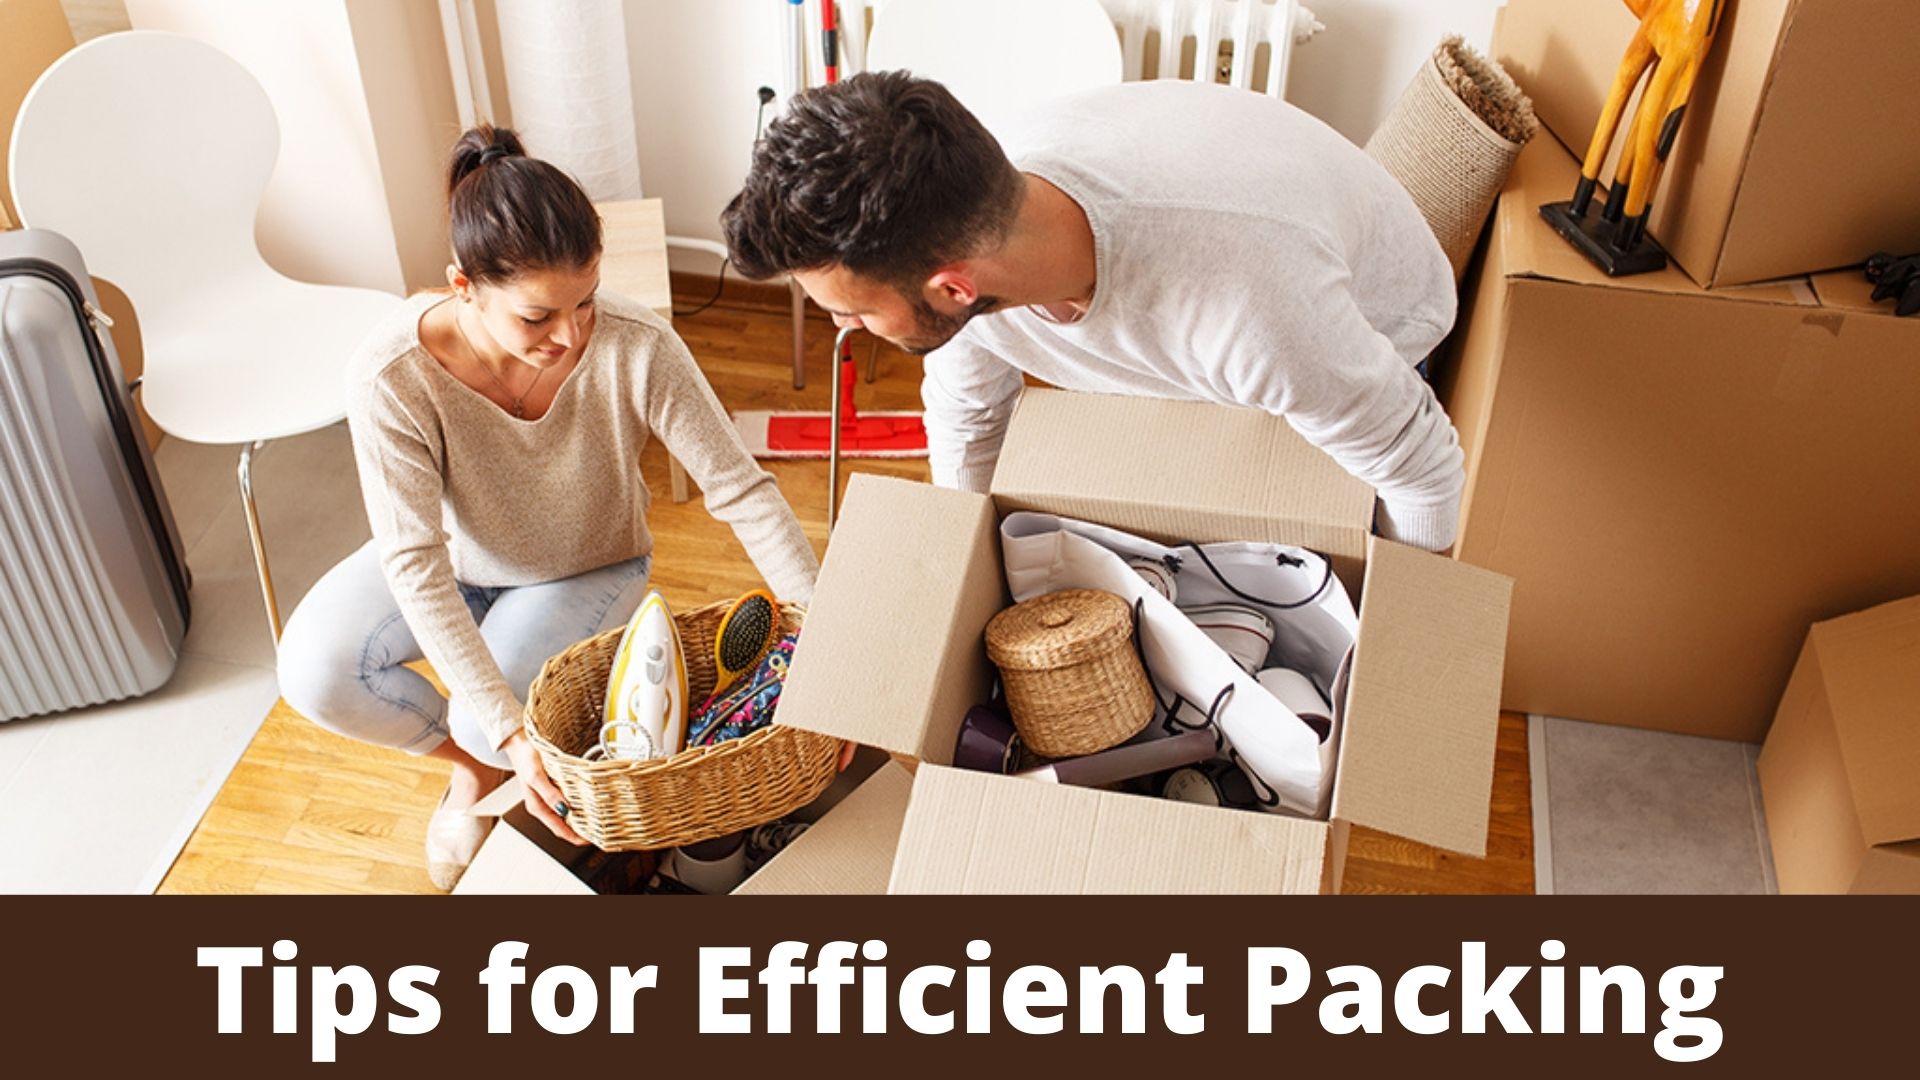 House Moving 7 Tips for Efficient Packing